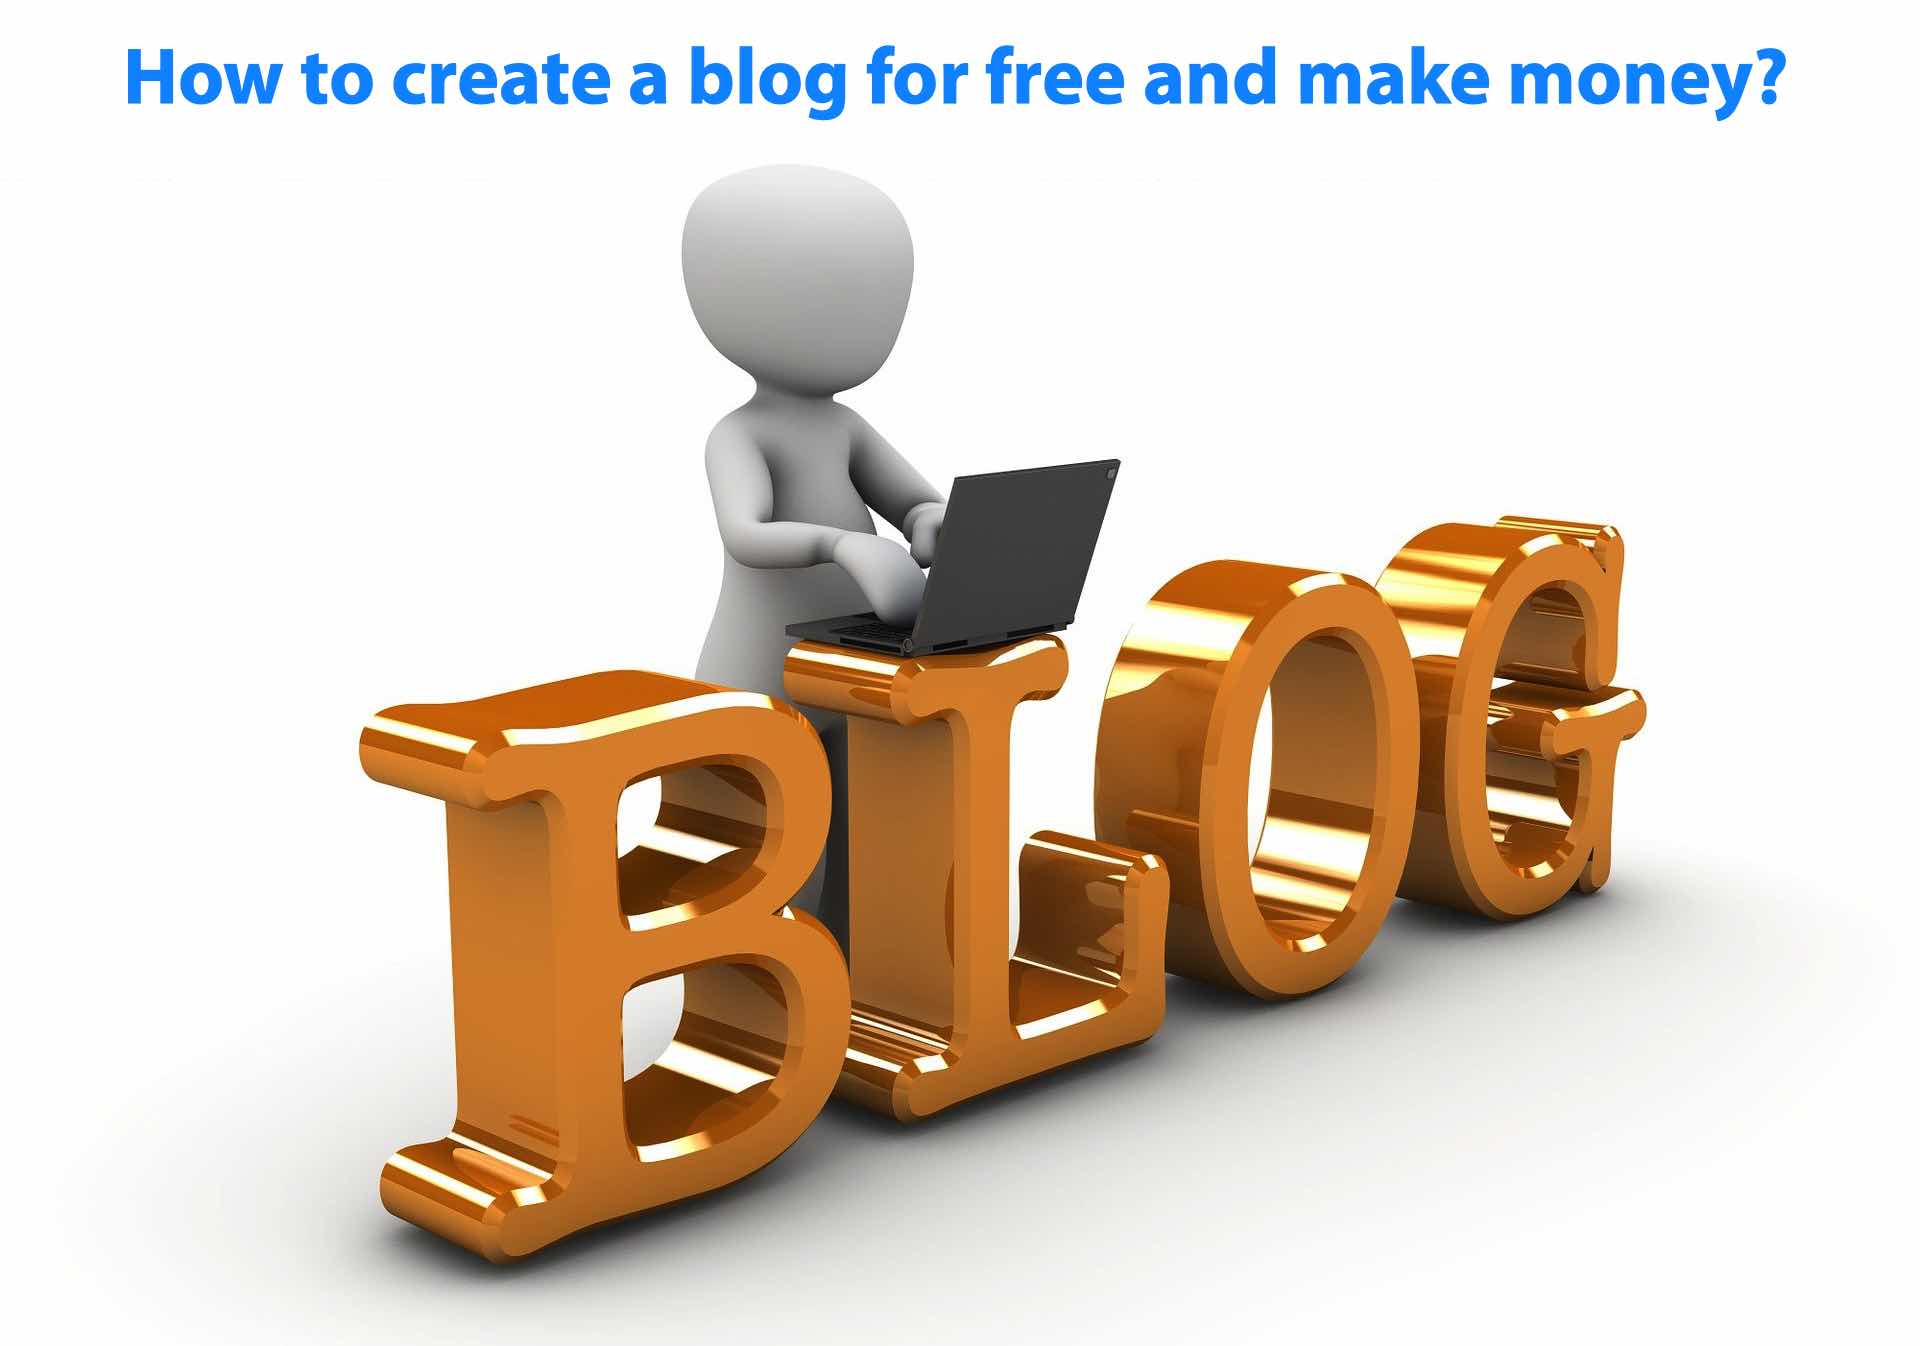 where can i create a blog for free